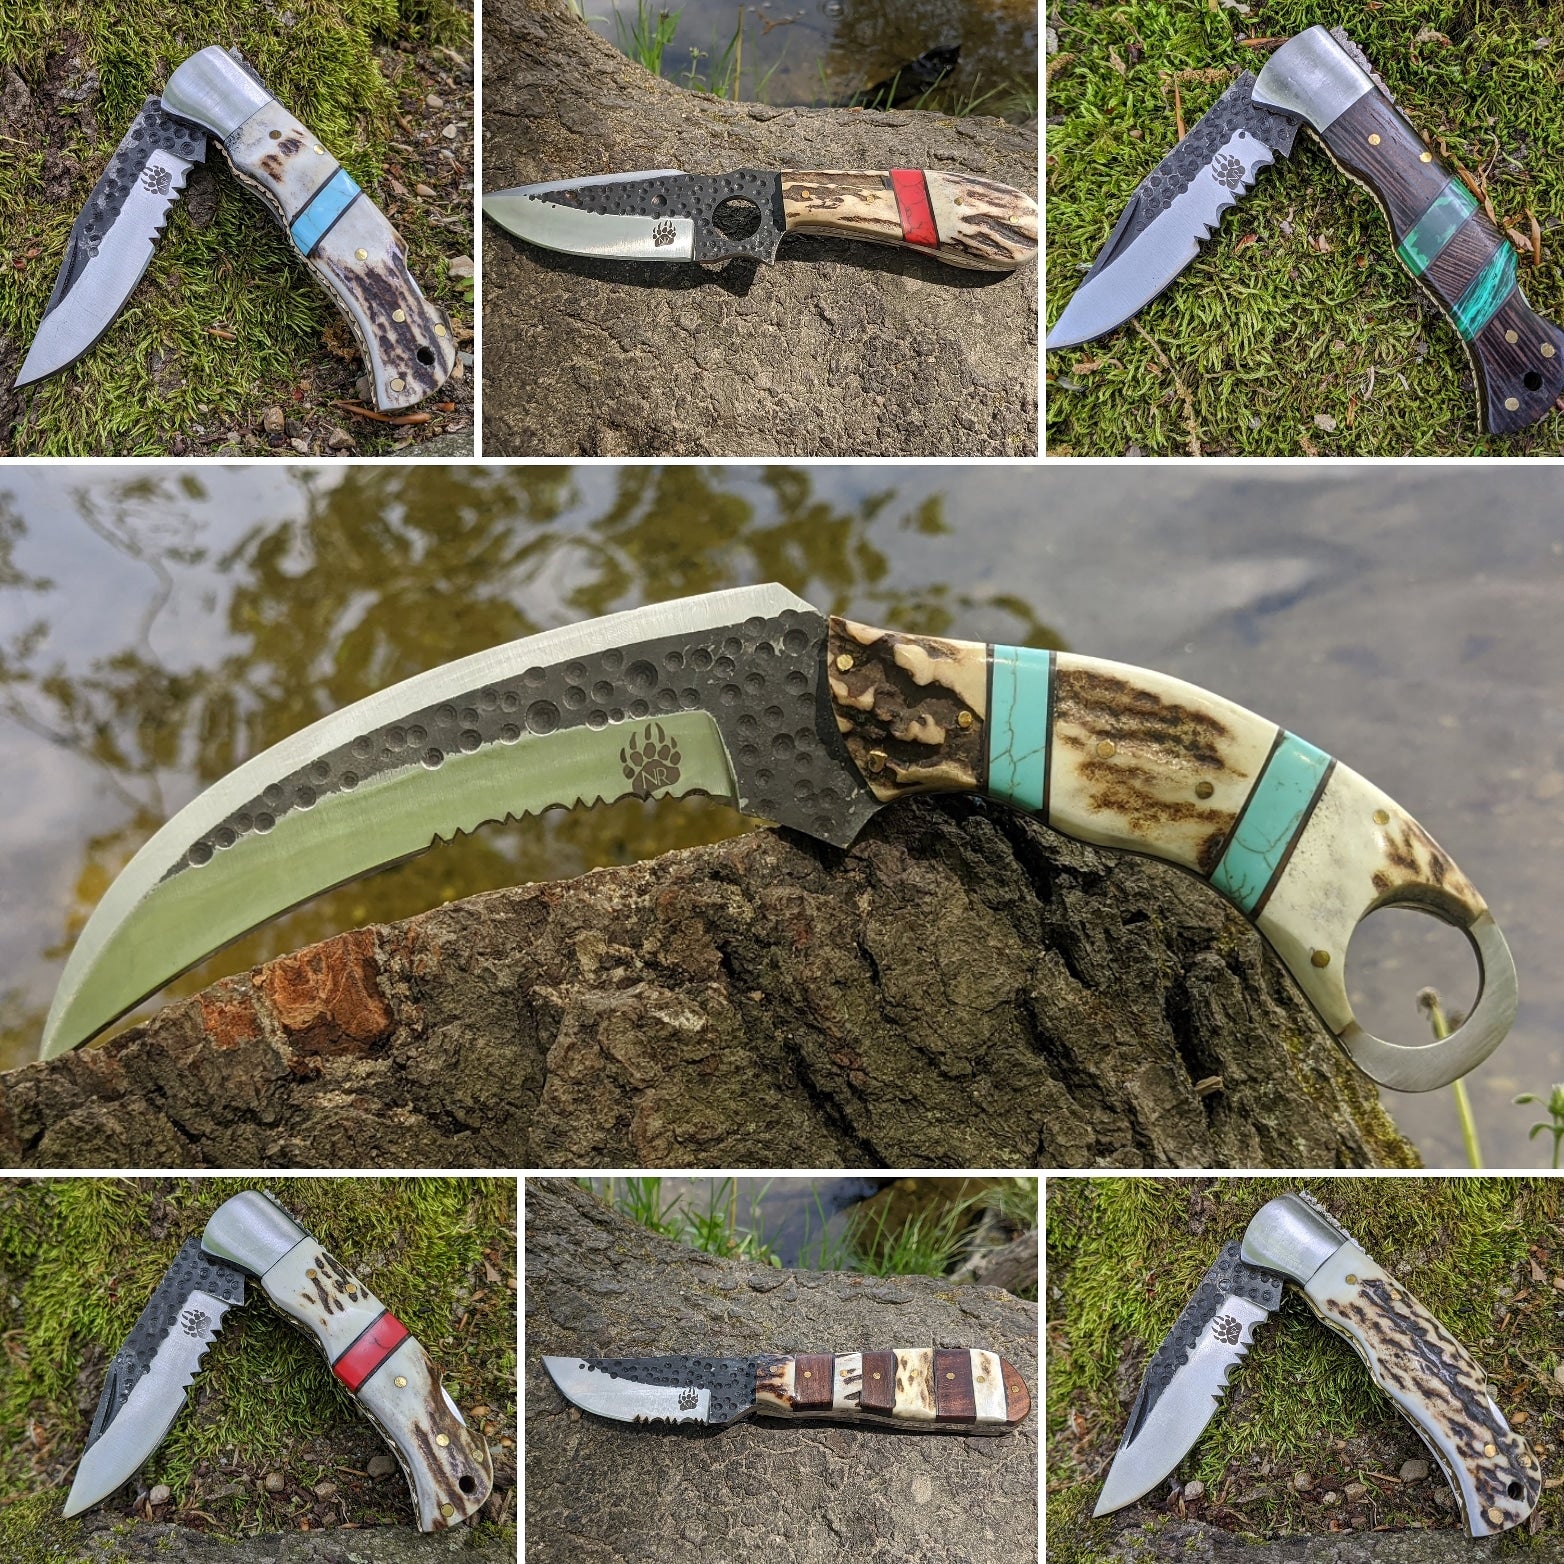 New Knives Arrived Today At North Rustic!